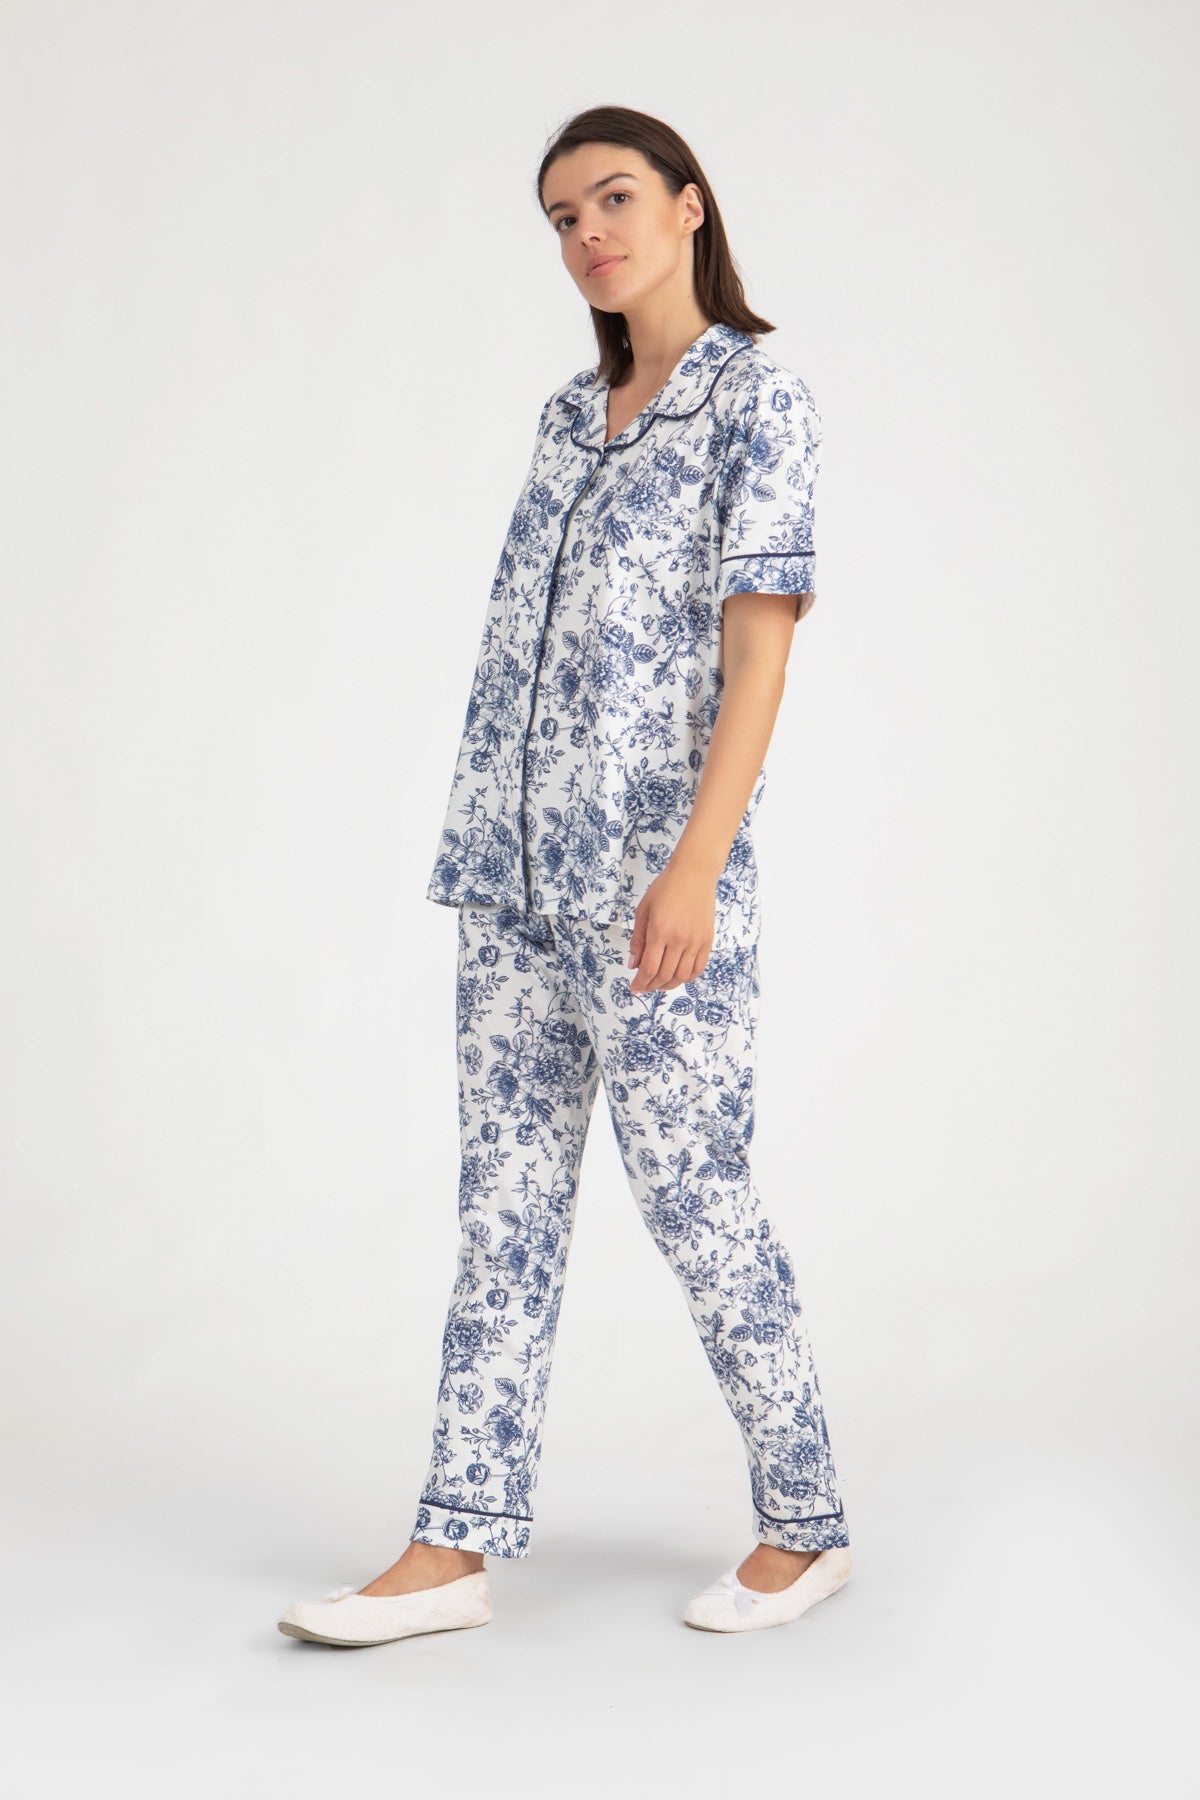 Short Sleeve All over print button down Pajama Set